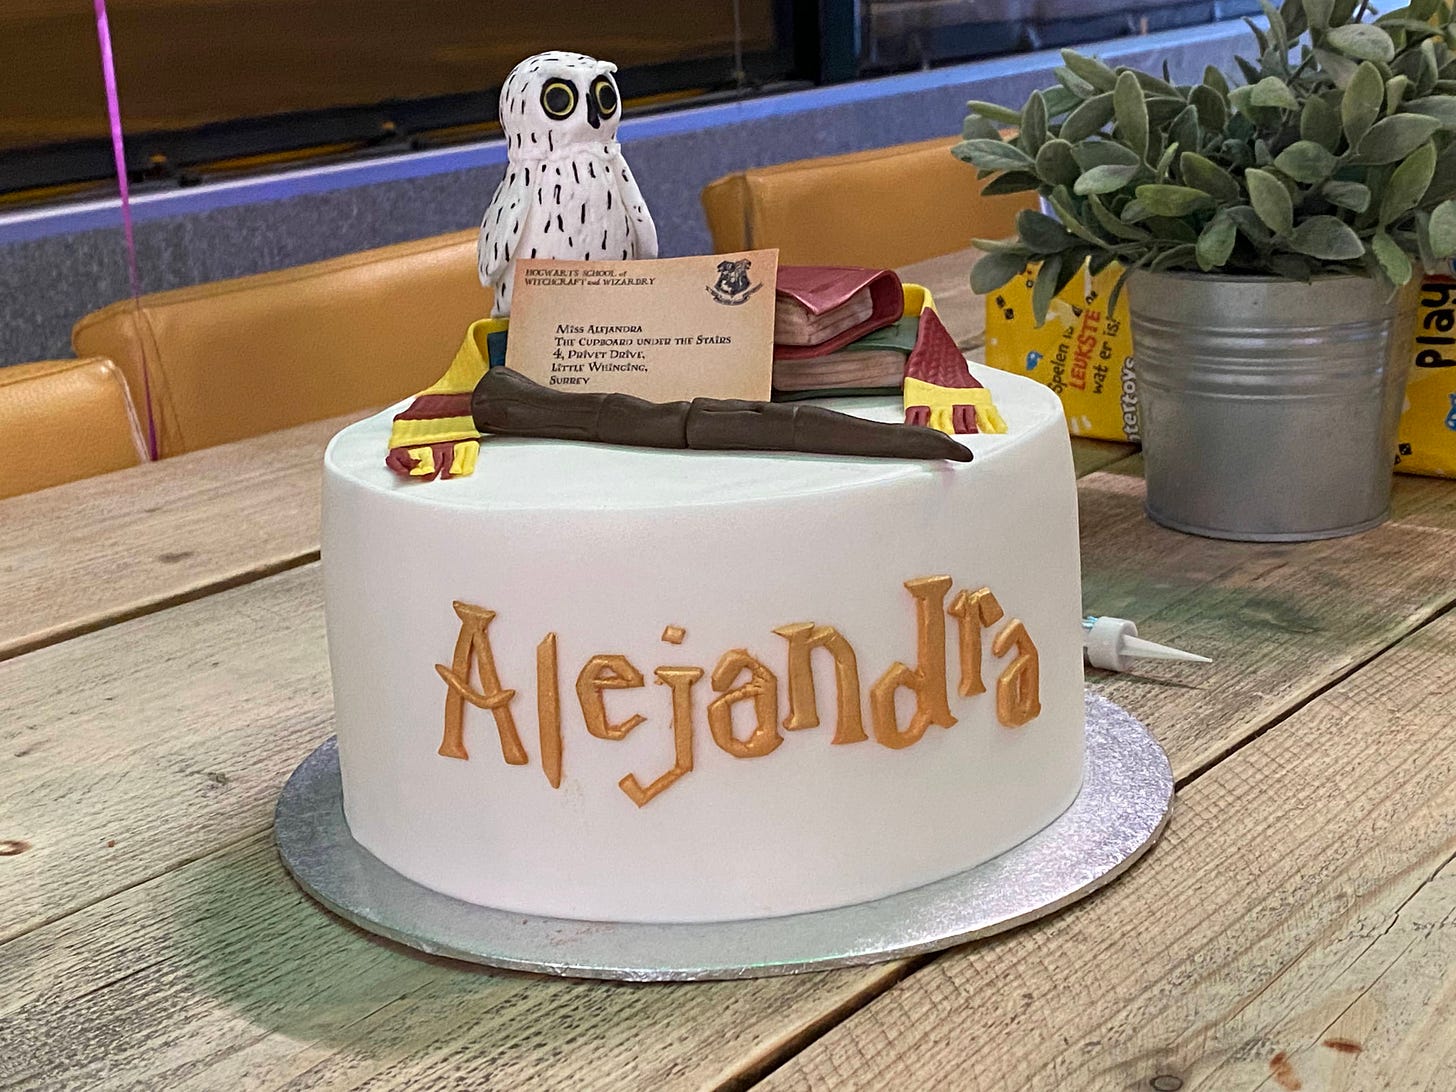 A birthday cake in Harry Potter style.